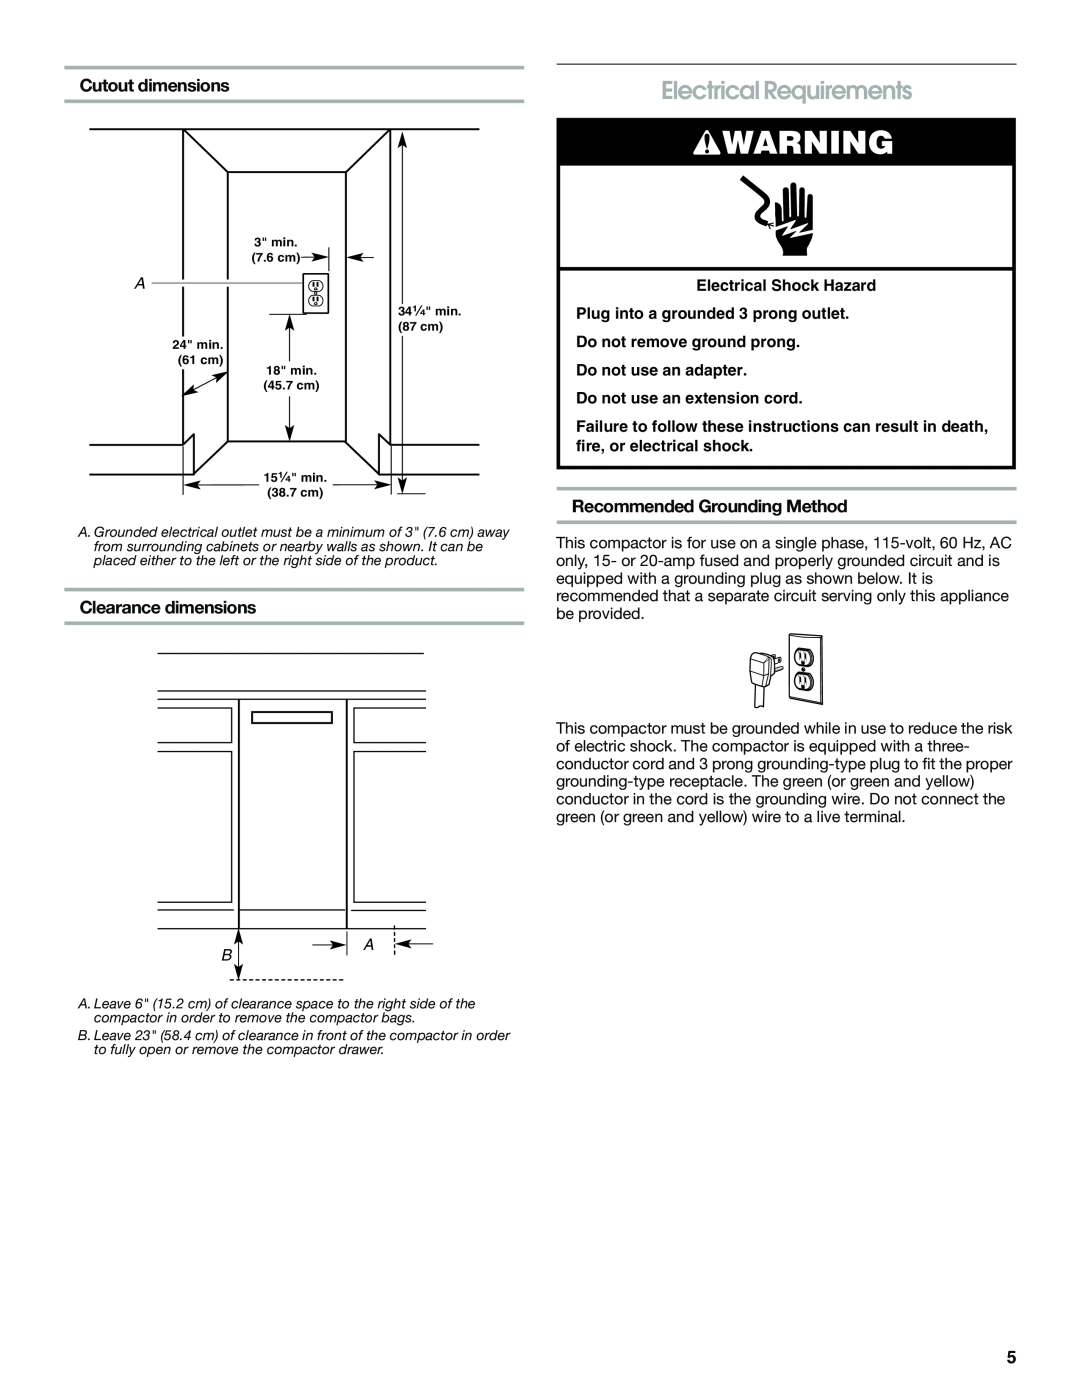 Jenn-Air W10242571A manual Electrical Requirements, Cutout dimensions, Recommended Grounding Method, Clearance dimensions 